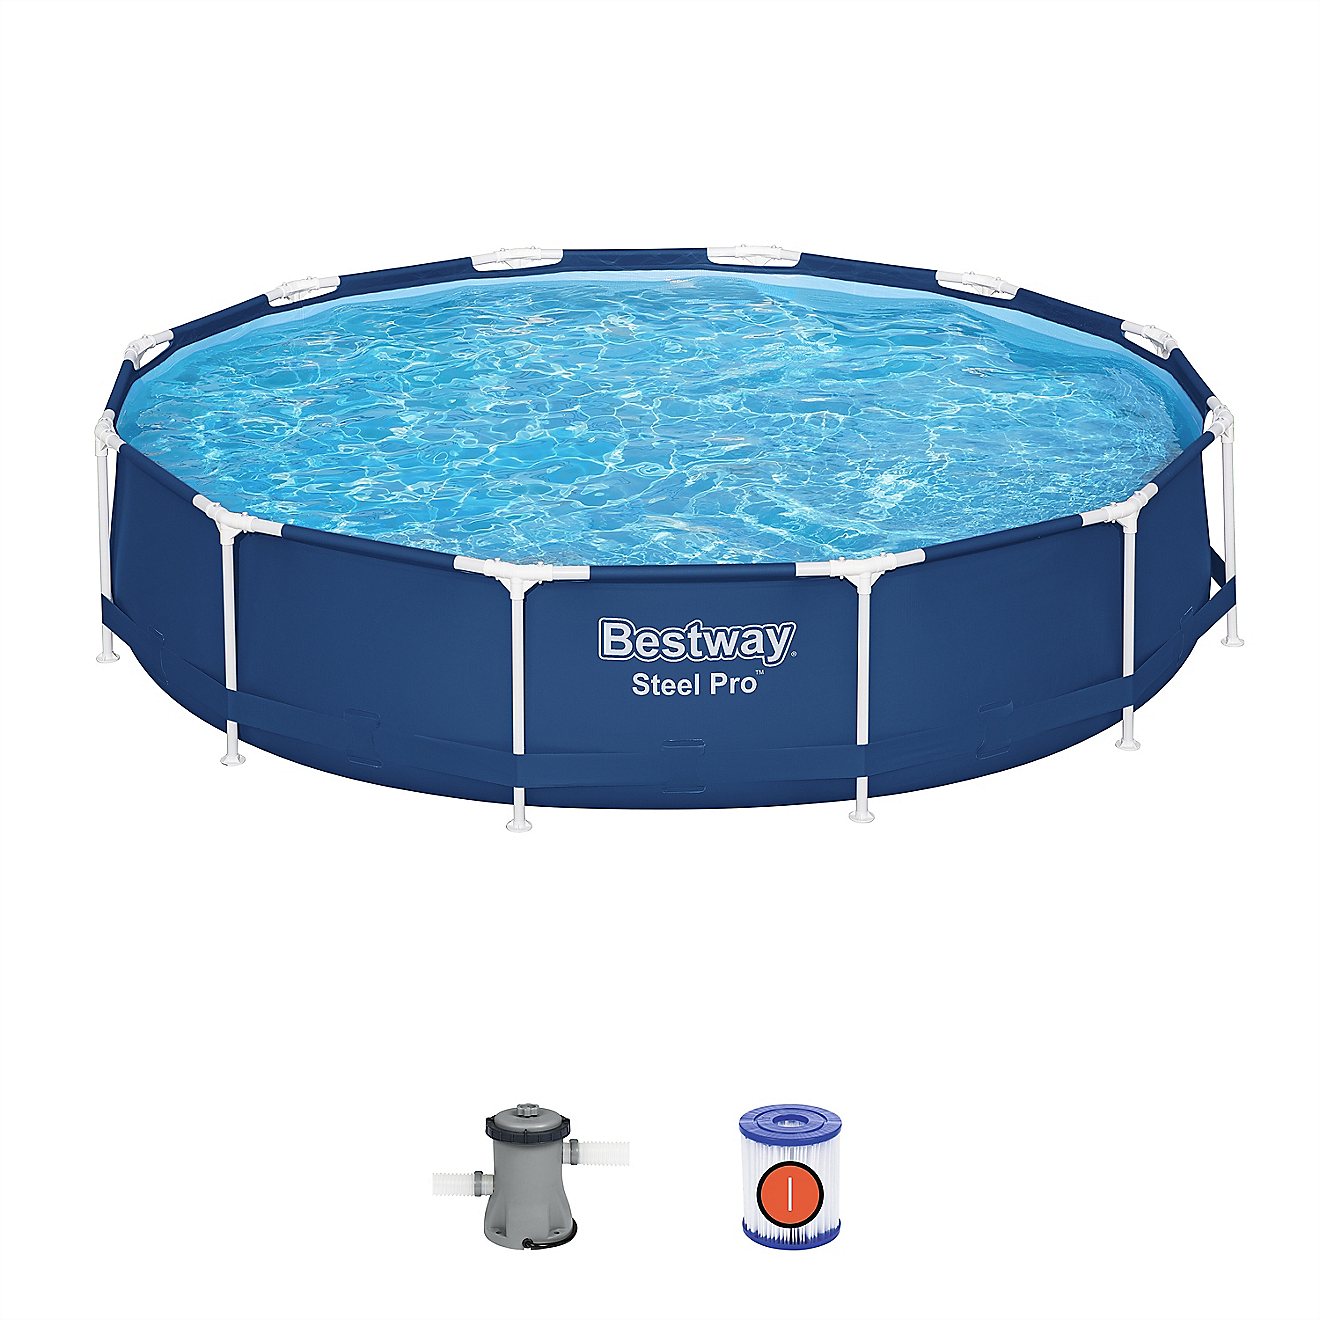 Bestway Steel Pro 12 ft x 30 in Above Ground Pool Set                                                                            - view number 1